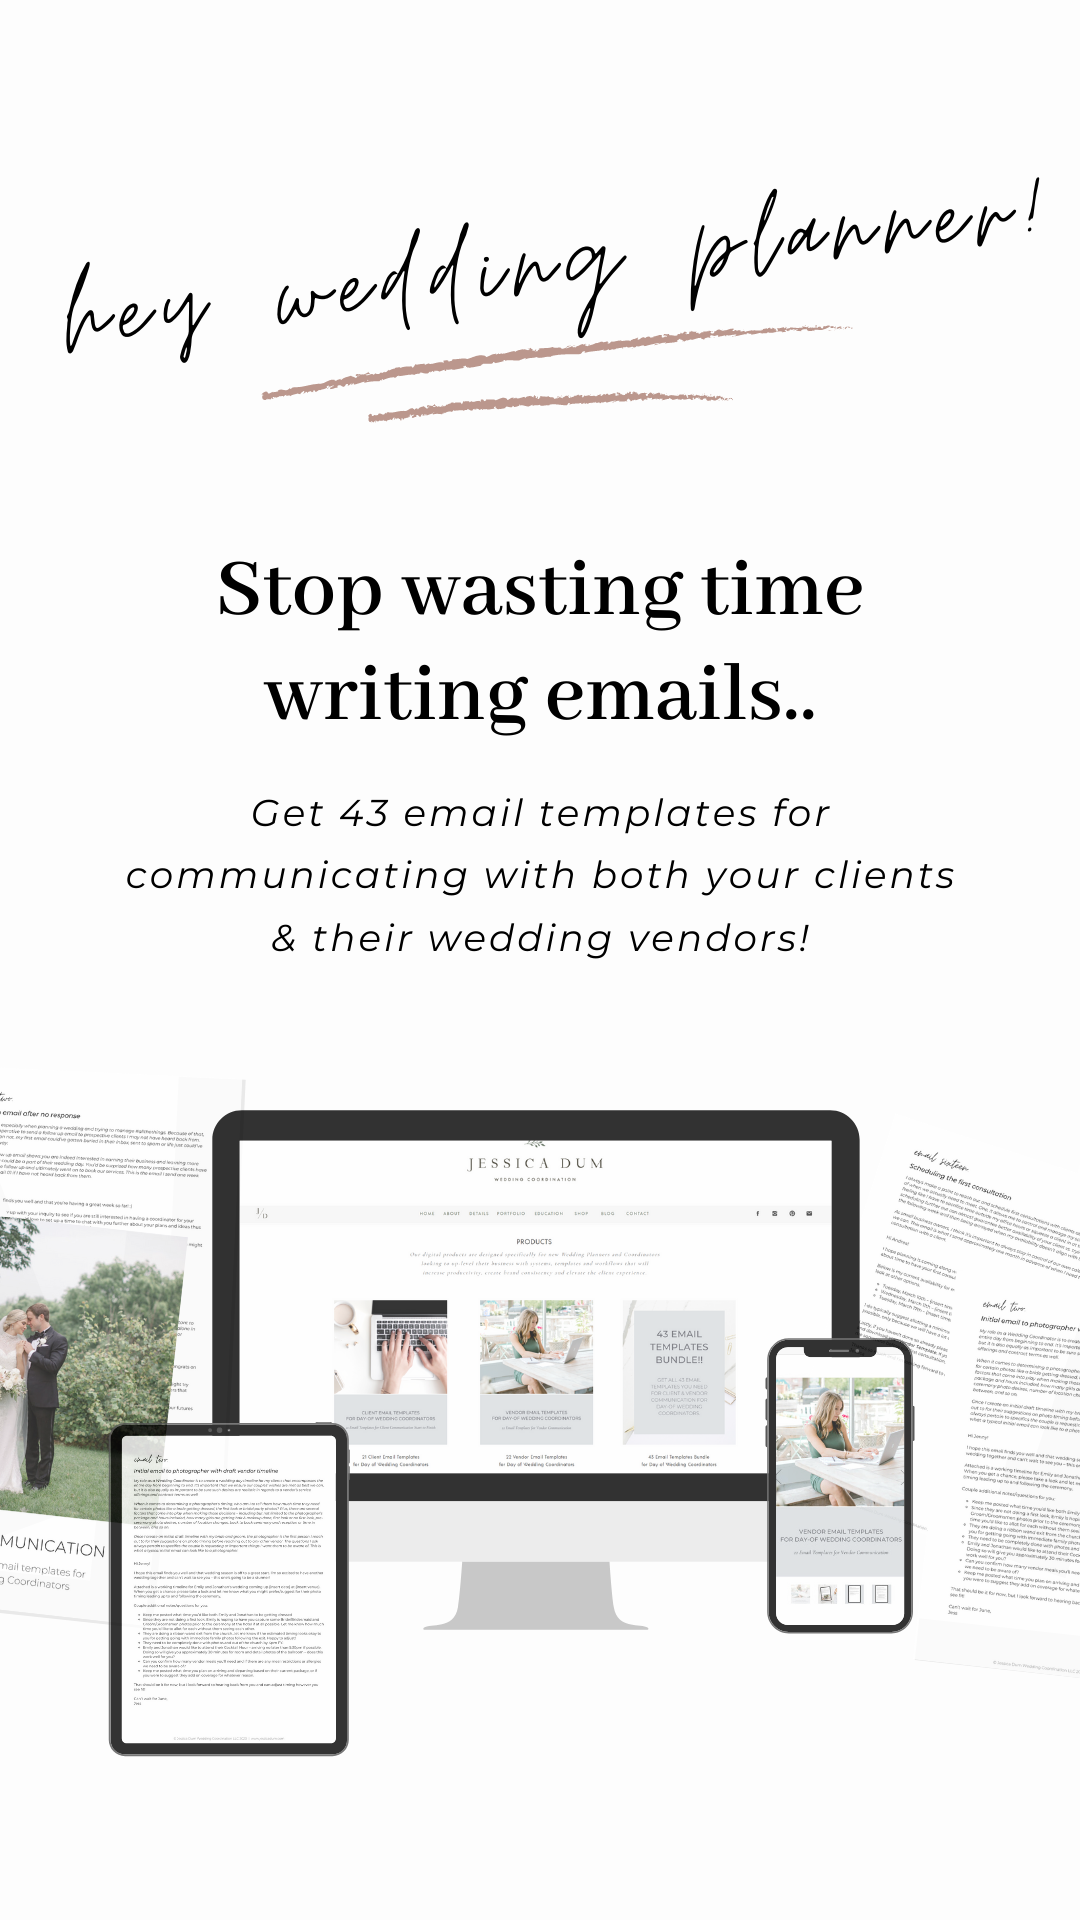 Email Response Templates for Wedding Planners. Get the exact email templates I use for communicating with clients AND their wedding vendors quickly and efficiently every time that ultimately saves me hundreds of hours a year. Save time in your wedding planning business by implementing email templates that ensure you communicate and collect all pertinent information with prospective and current wedding clients as well as all of their wedding vendors every single time. Or snag the exact email copy my team and I use when communicating with clients and vendors throughout the wedding planning process. | Wedding Planner Resources